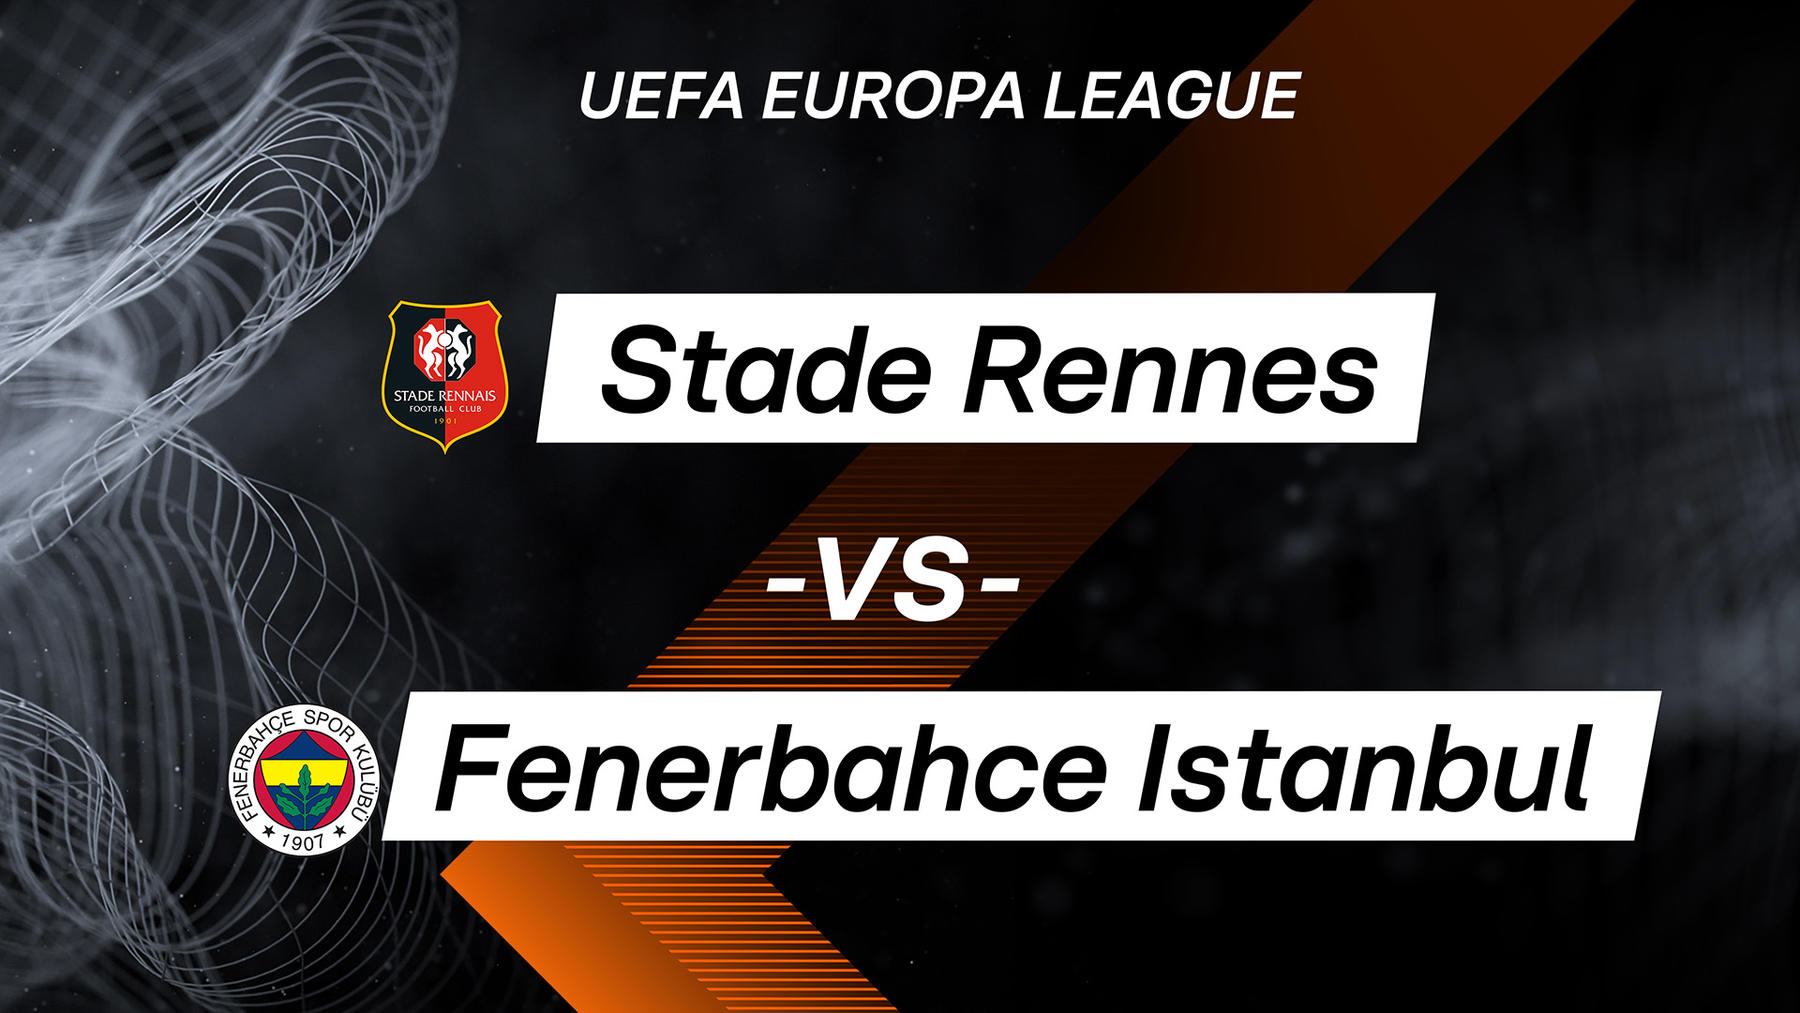 Stade Rennes vs. Fenerbahce Istanbul - Matchday 2)